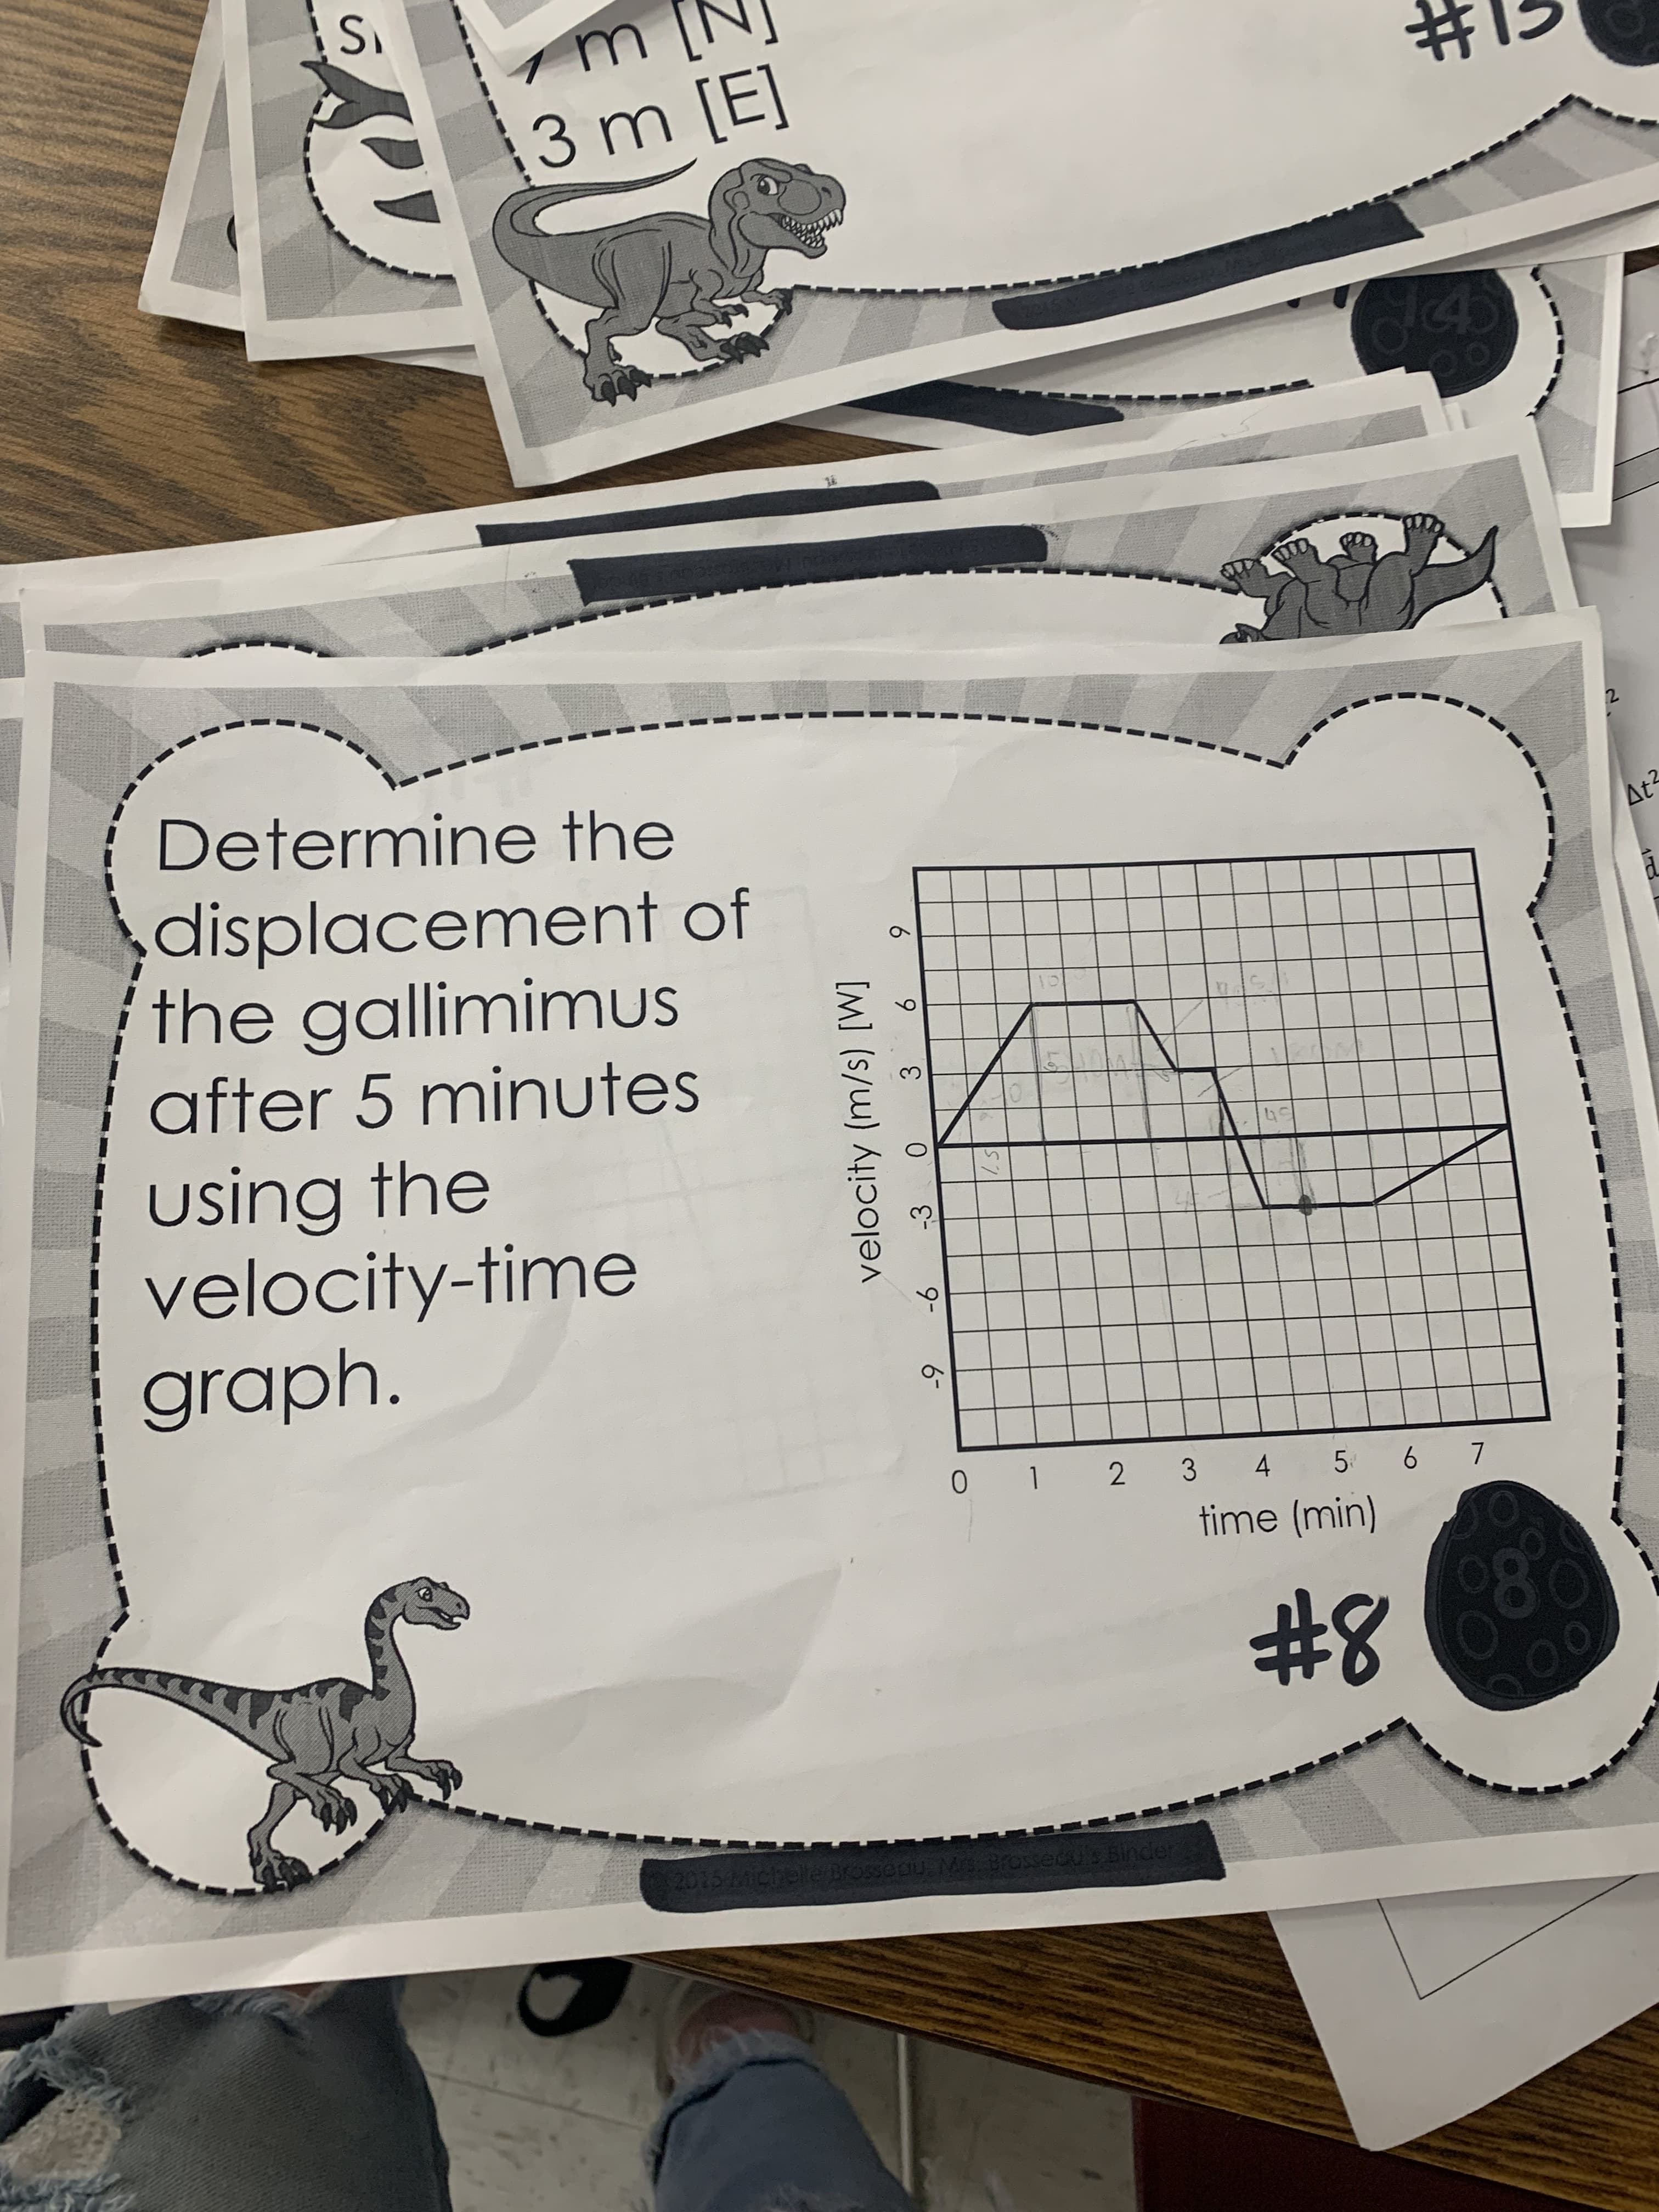 6.
6.
3.
9-
6-
velocity (m/s) [W]
'S
3]
000
At
Determine the
displacement of
the gallimimus
after 5 minutes
using the
velocity-time
graph.
0 1 2 3 4
time (min)
5 6 7
080
00
8#
2015 Michelle Brosepu Ms Brosecu's Binder
